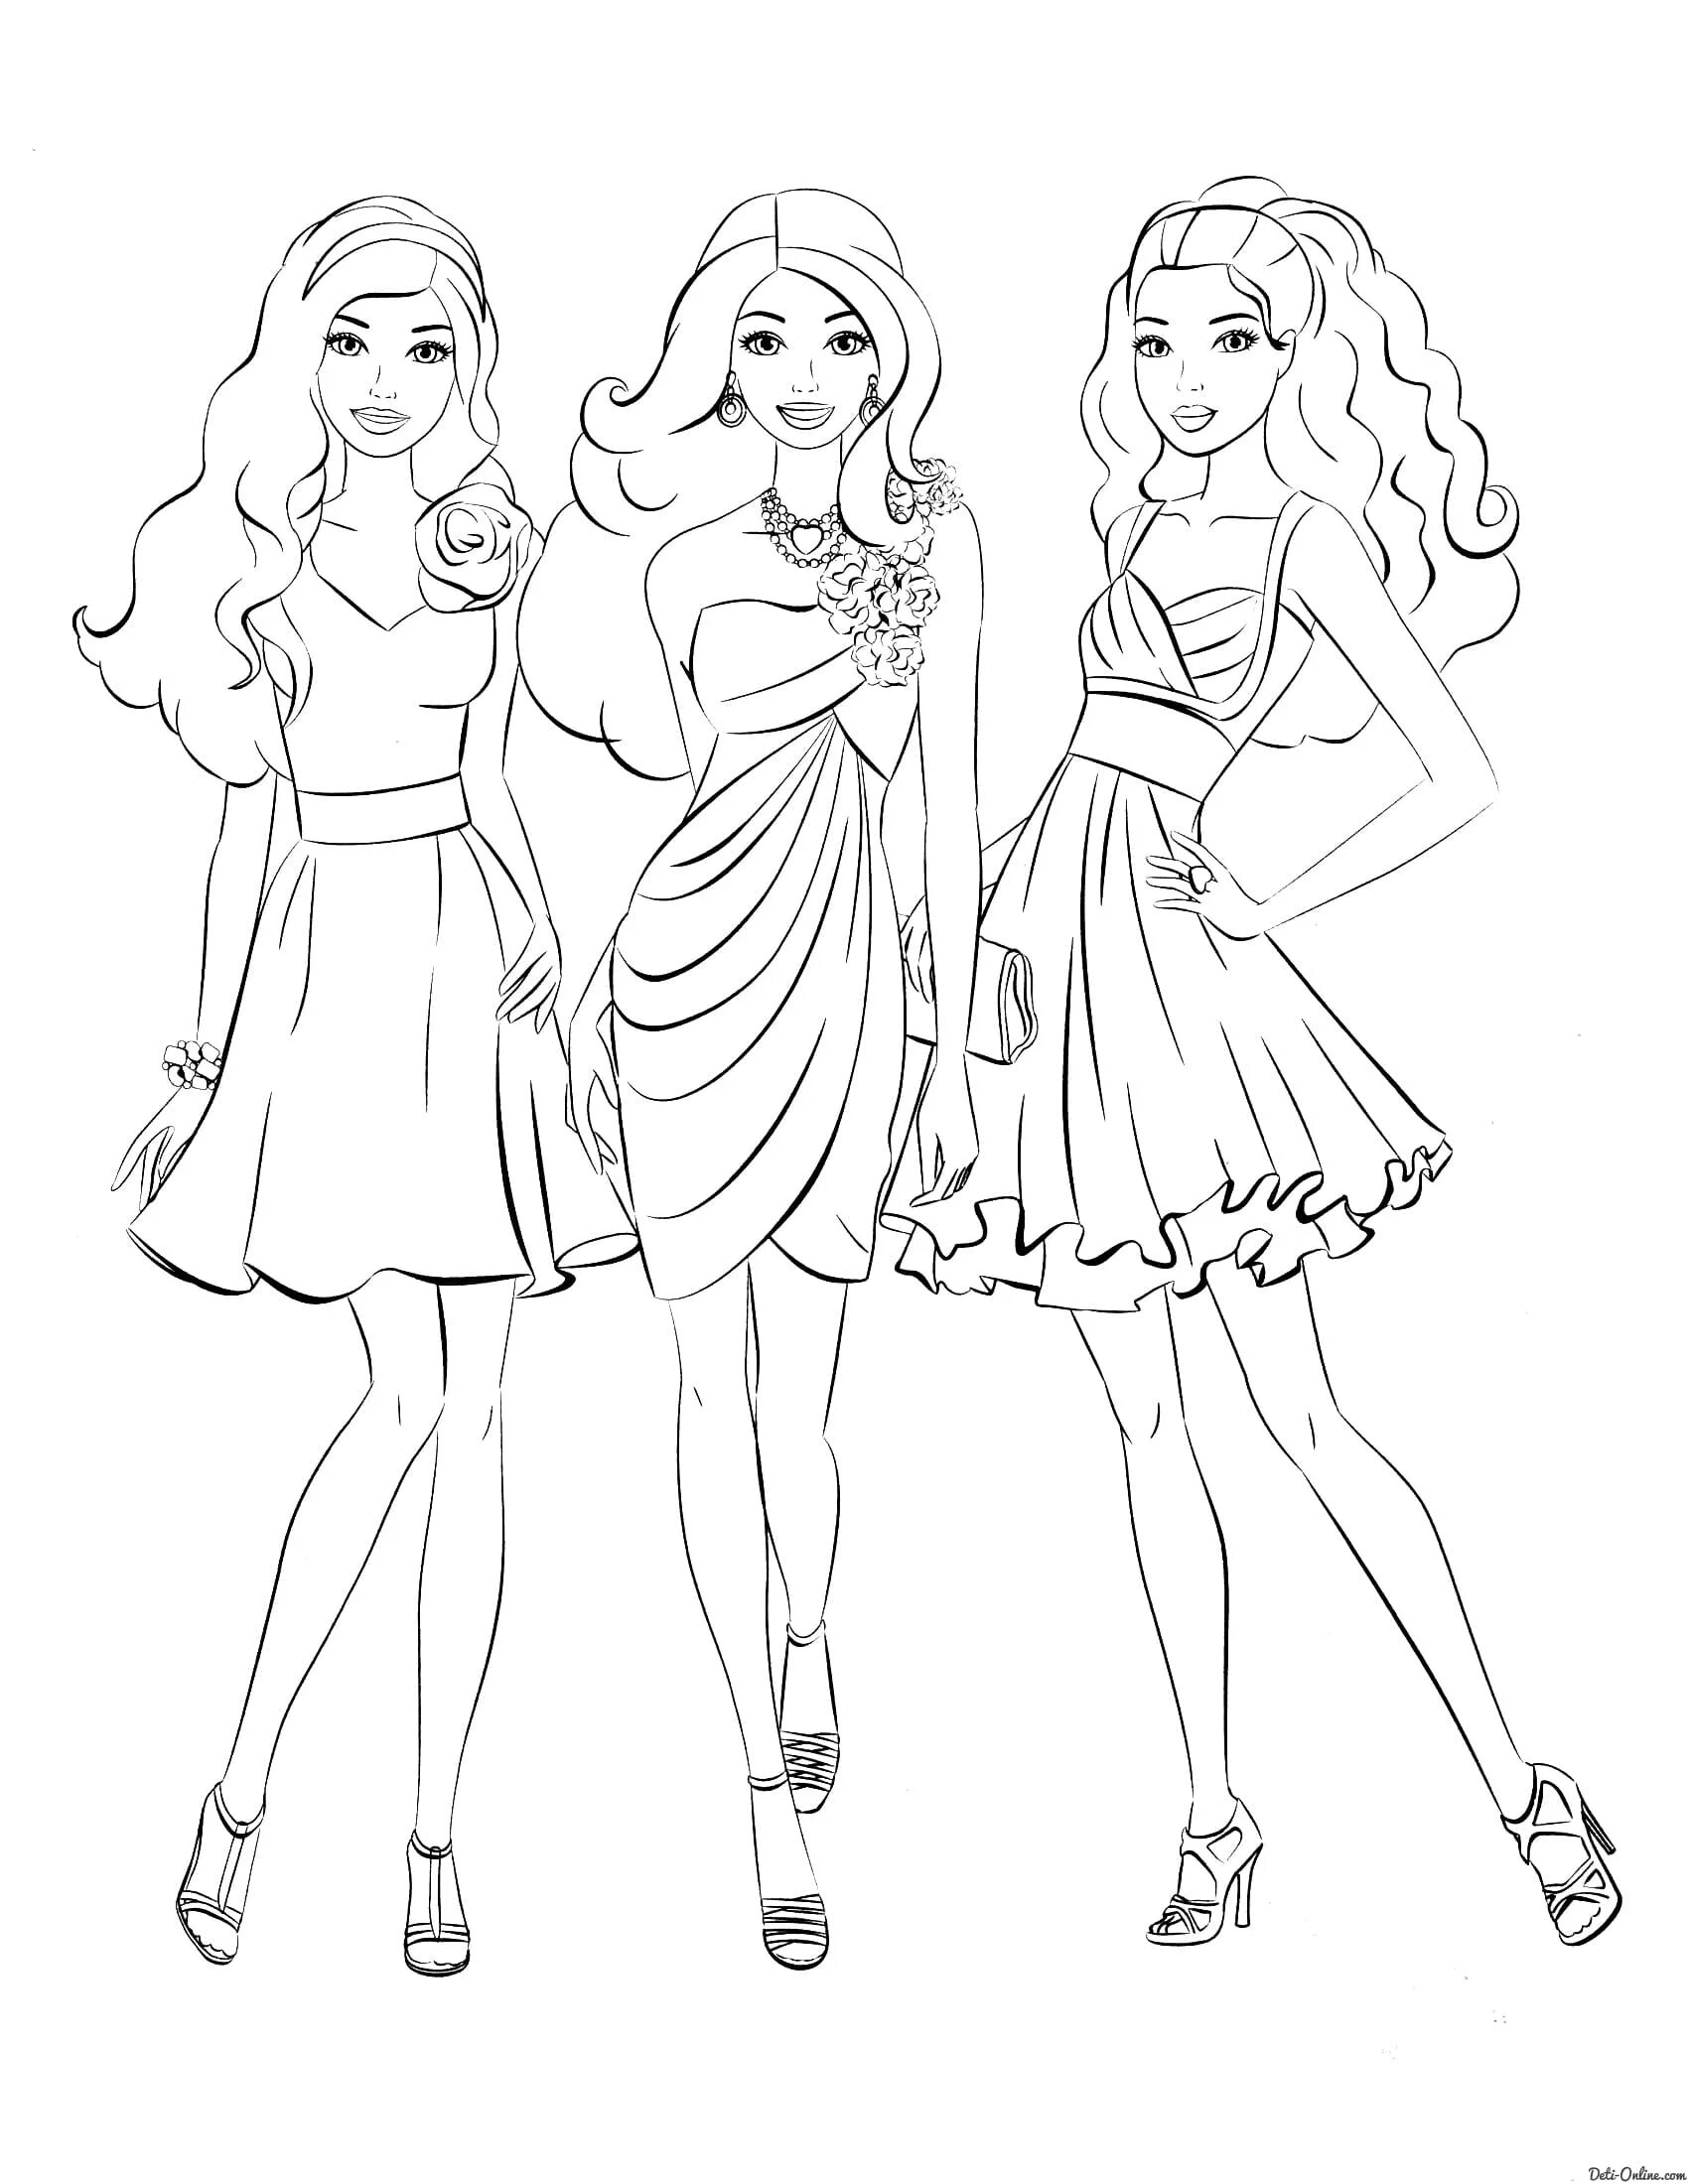 Luminous barbie doll coloring pages